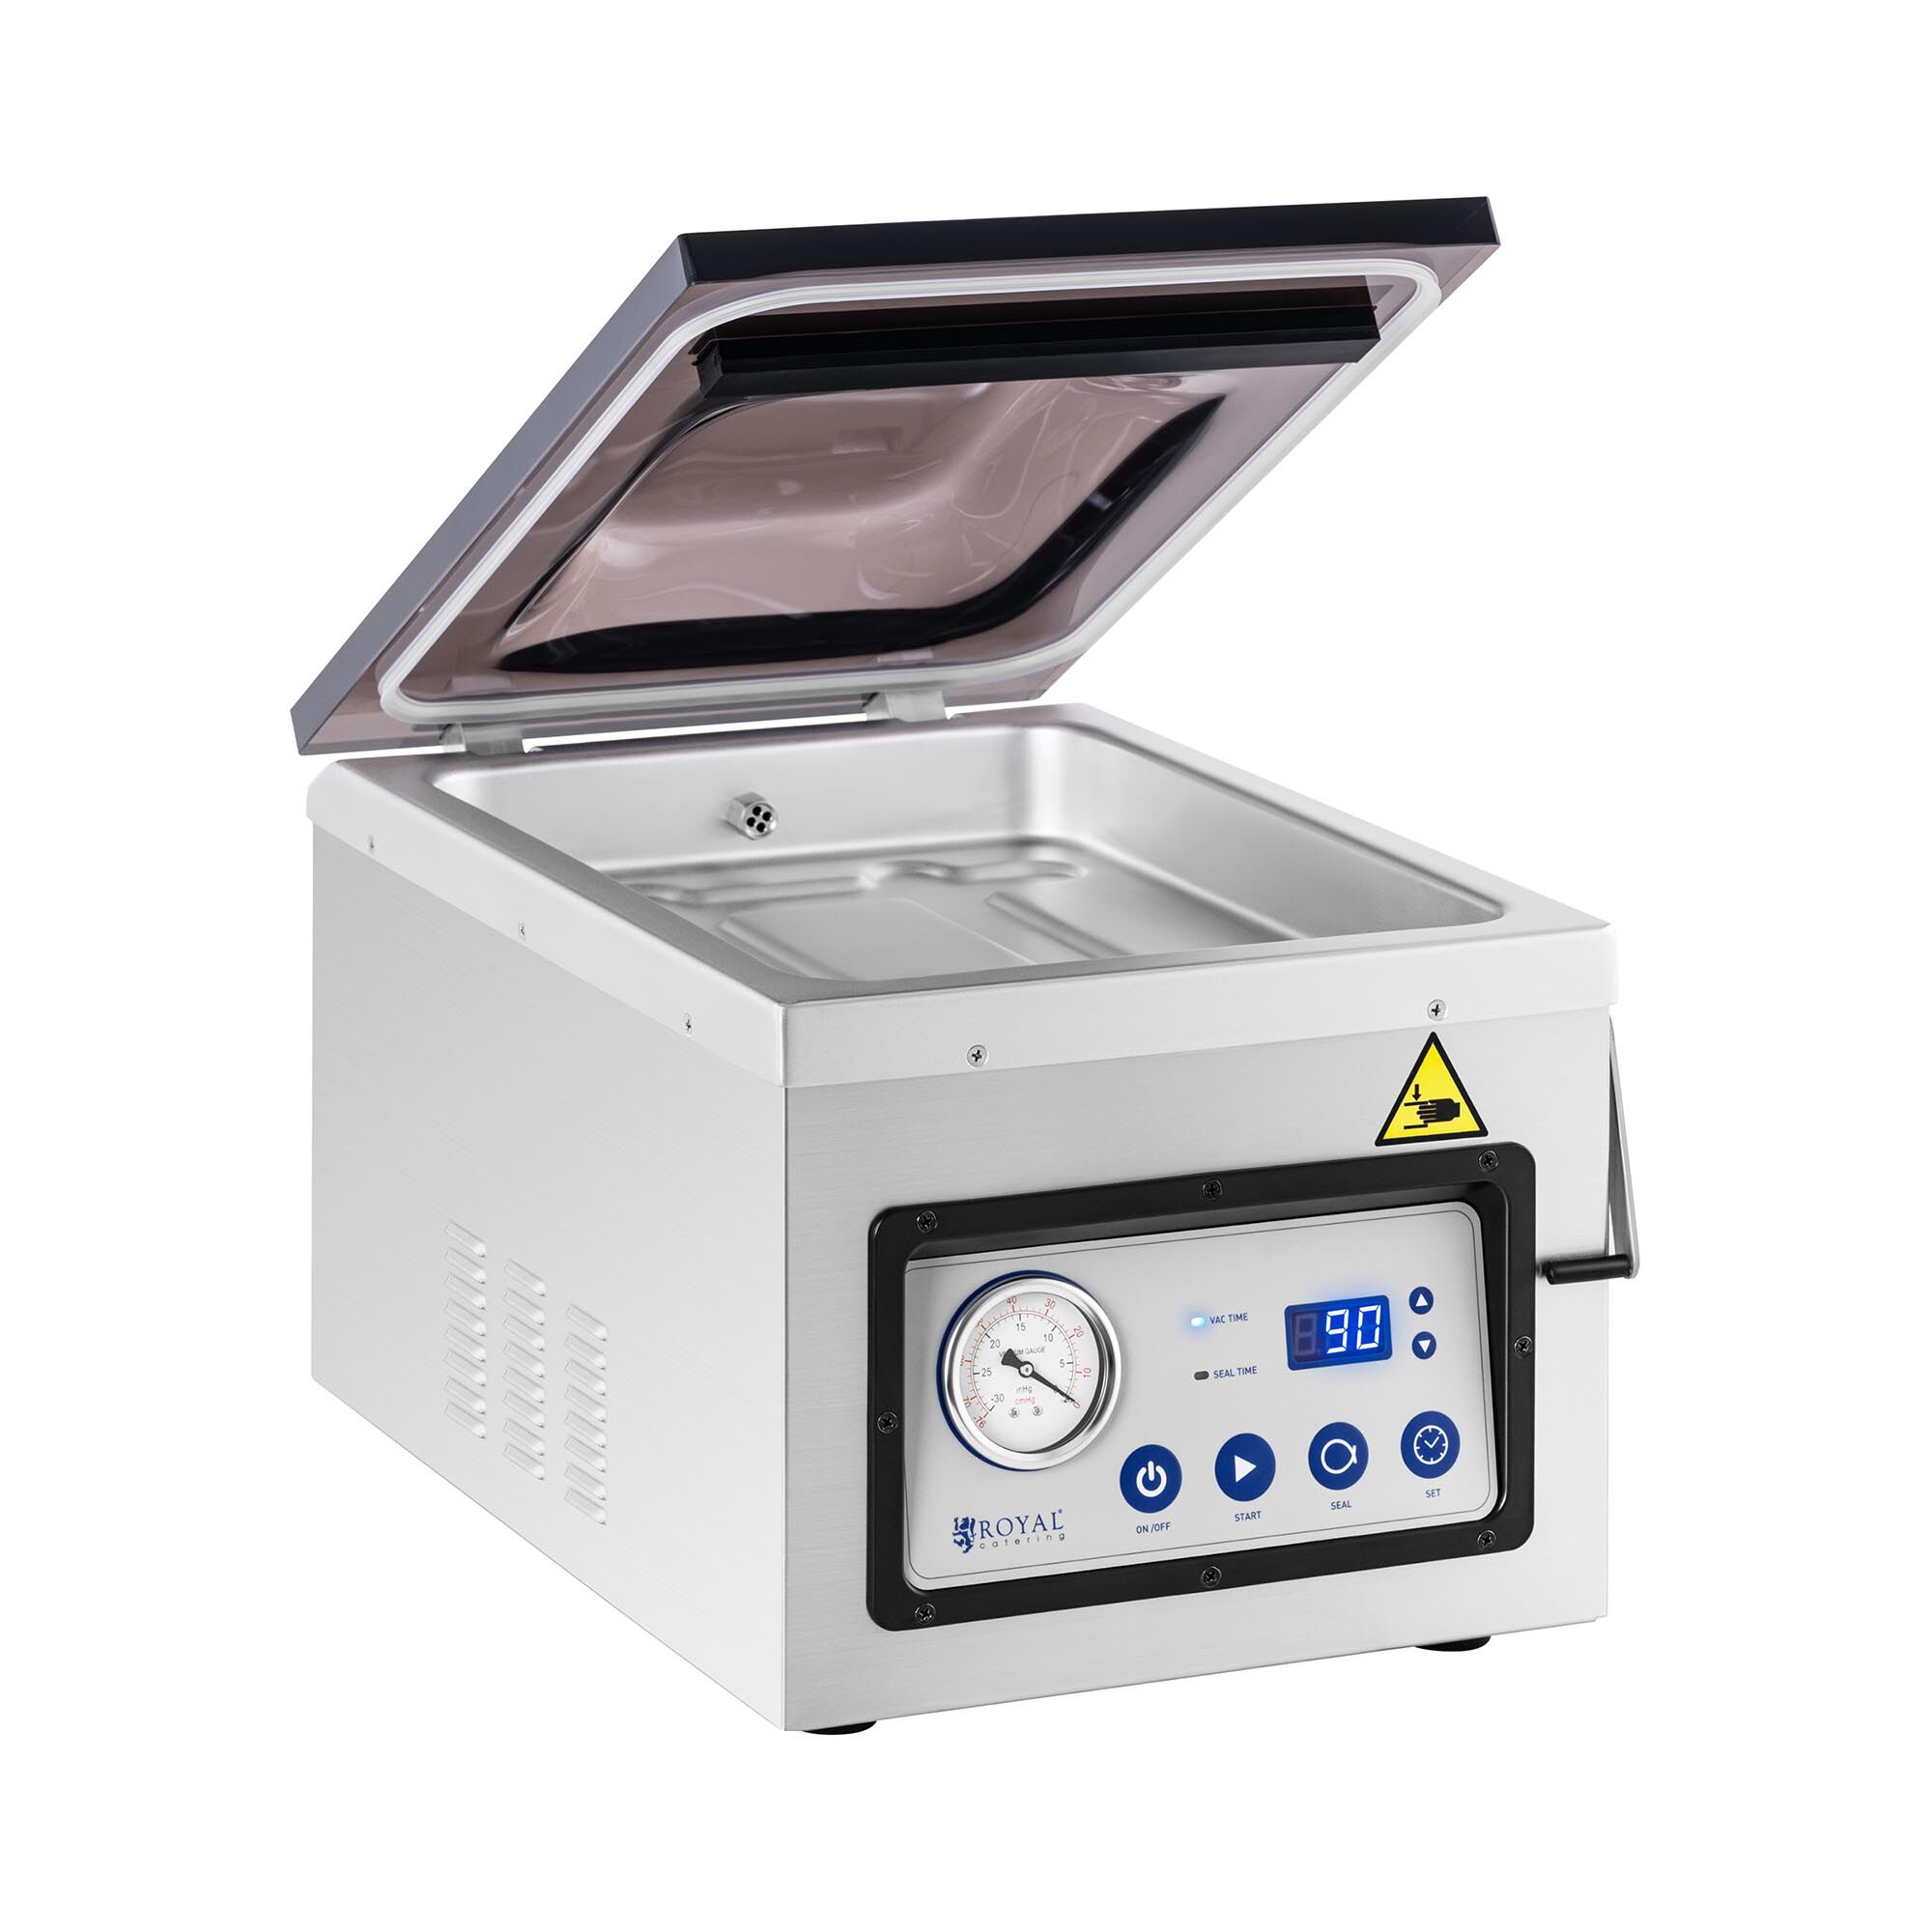 Royal Catering Vacuum Packing Machine - 1,000 W - 26 cm - stainless steel